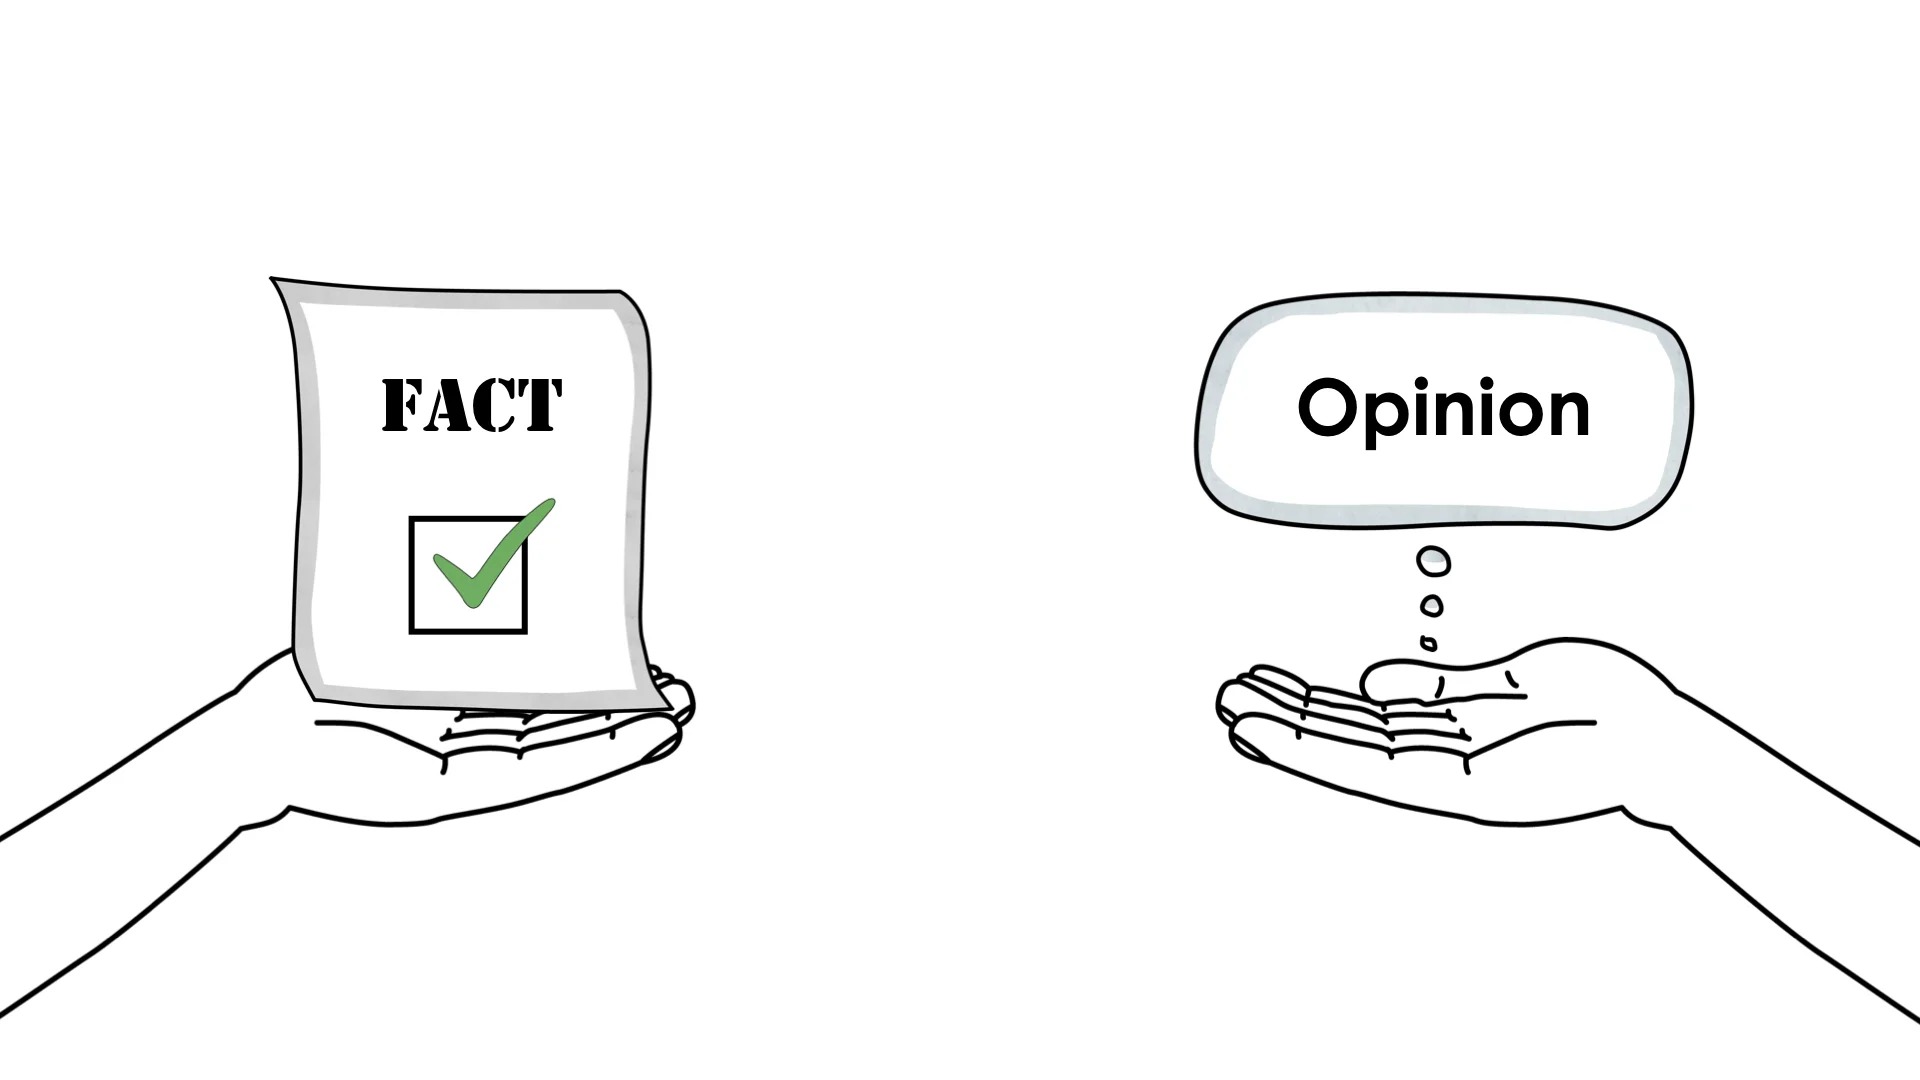 Product opinion. Fact and opinion. Facts vs opinions. Distinguishing facts and opinions. Opinion картинка.